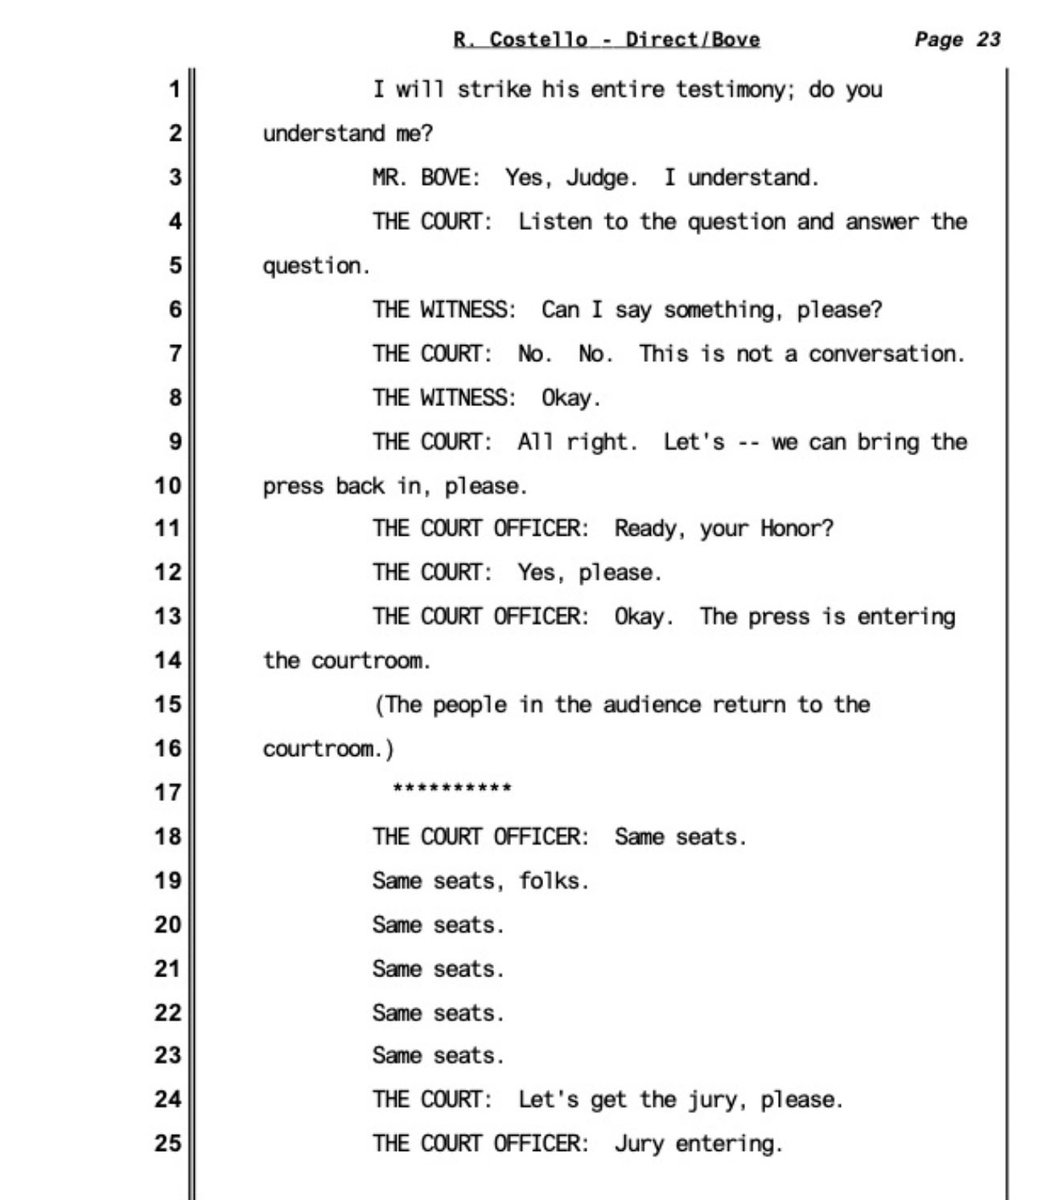 Here’s *that* exchange between Justice Merchan and Robert Costello earlier today: JUSTICE MERCHAN to ROBERT COSTELLO: “Are you staring me down right now?…I’m putting you on notice that your conduct is contemptuous…”